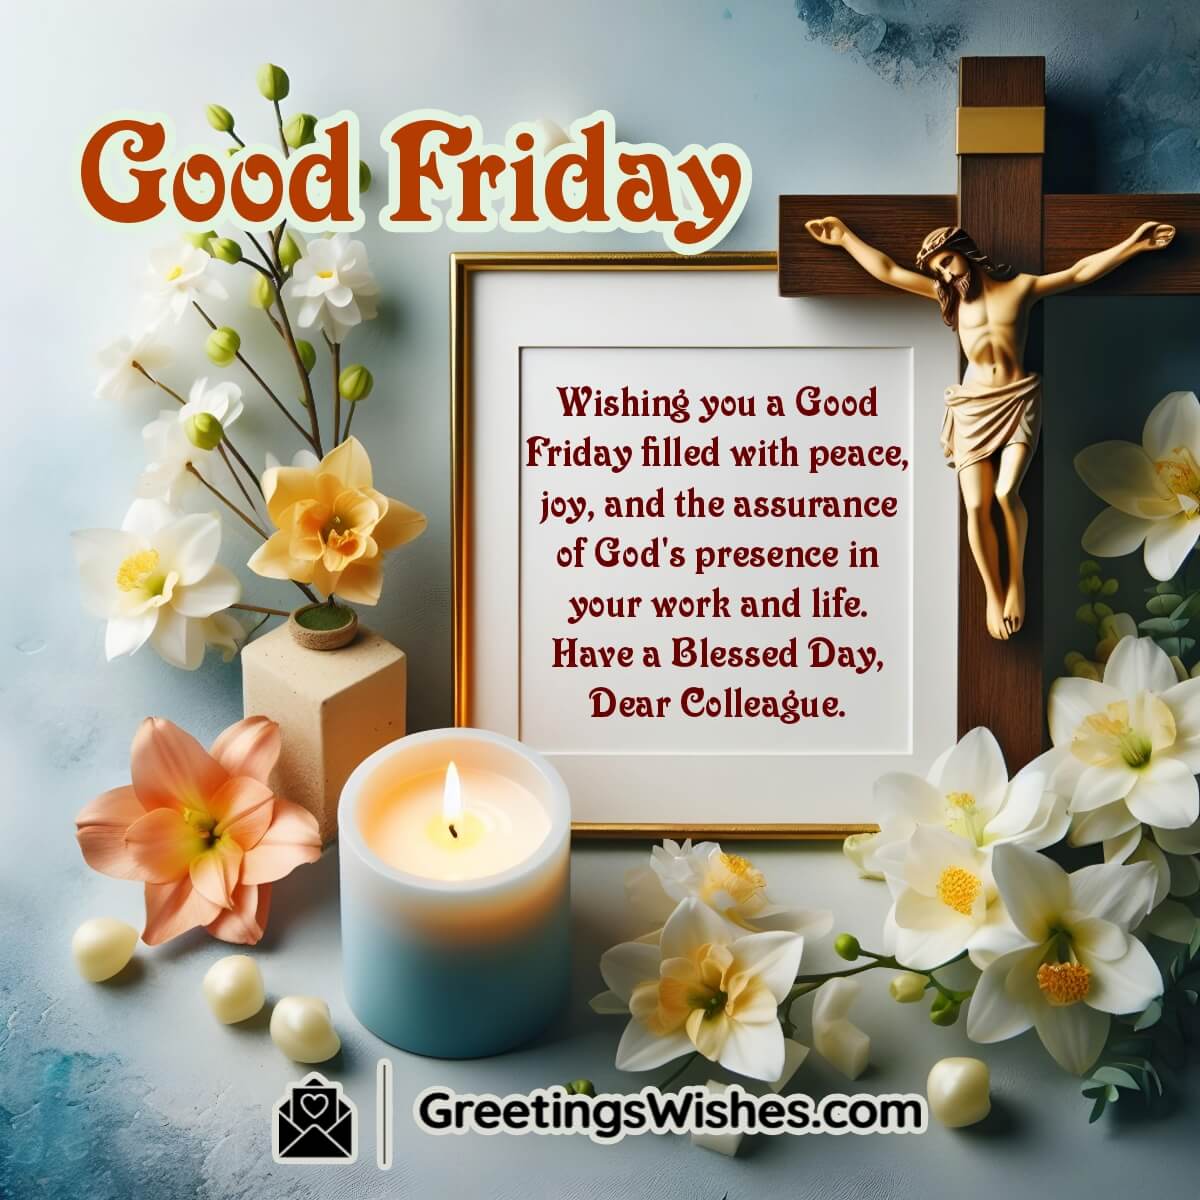 Good Friday Wish For Colleagues